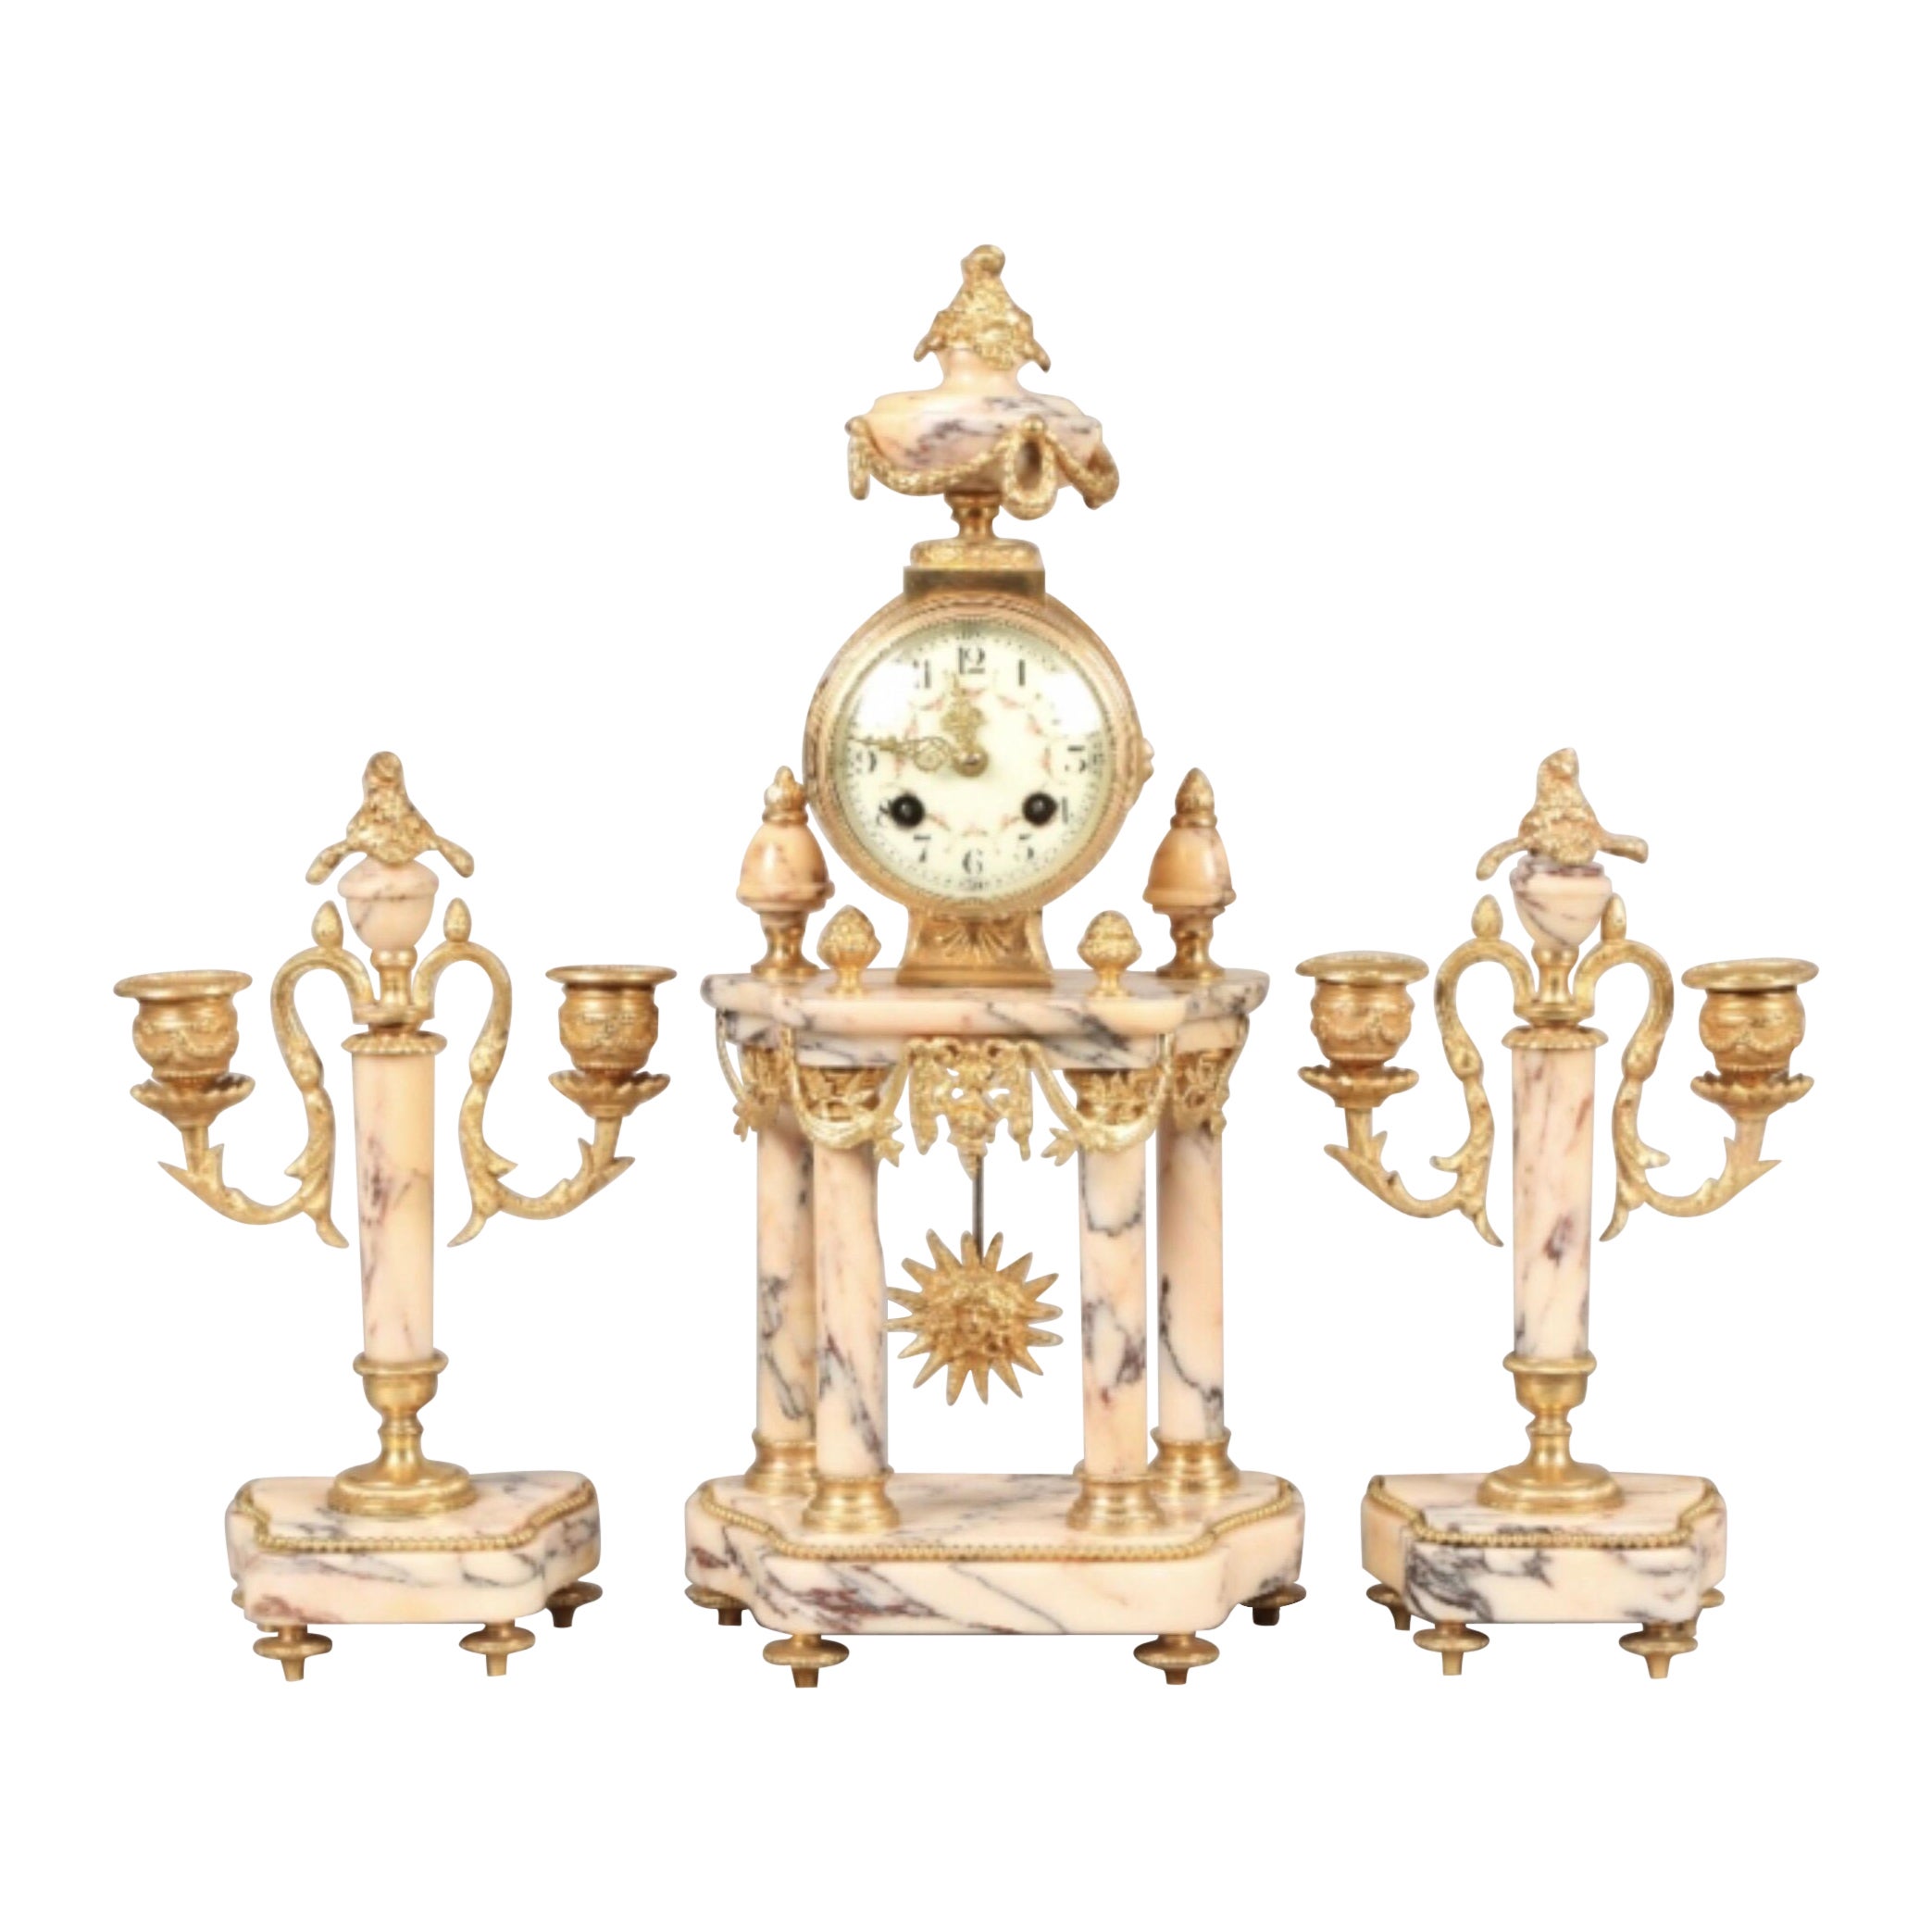 Antique French Marble and Ormolu Clock Garniture Set